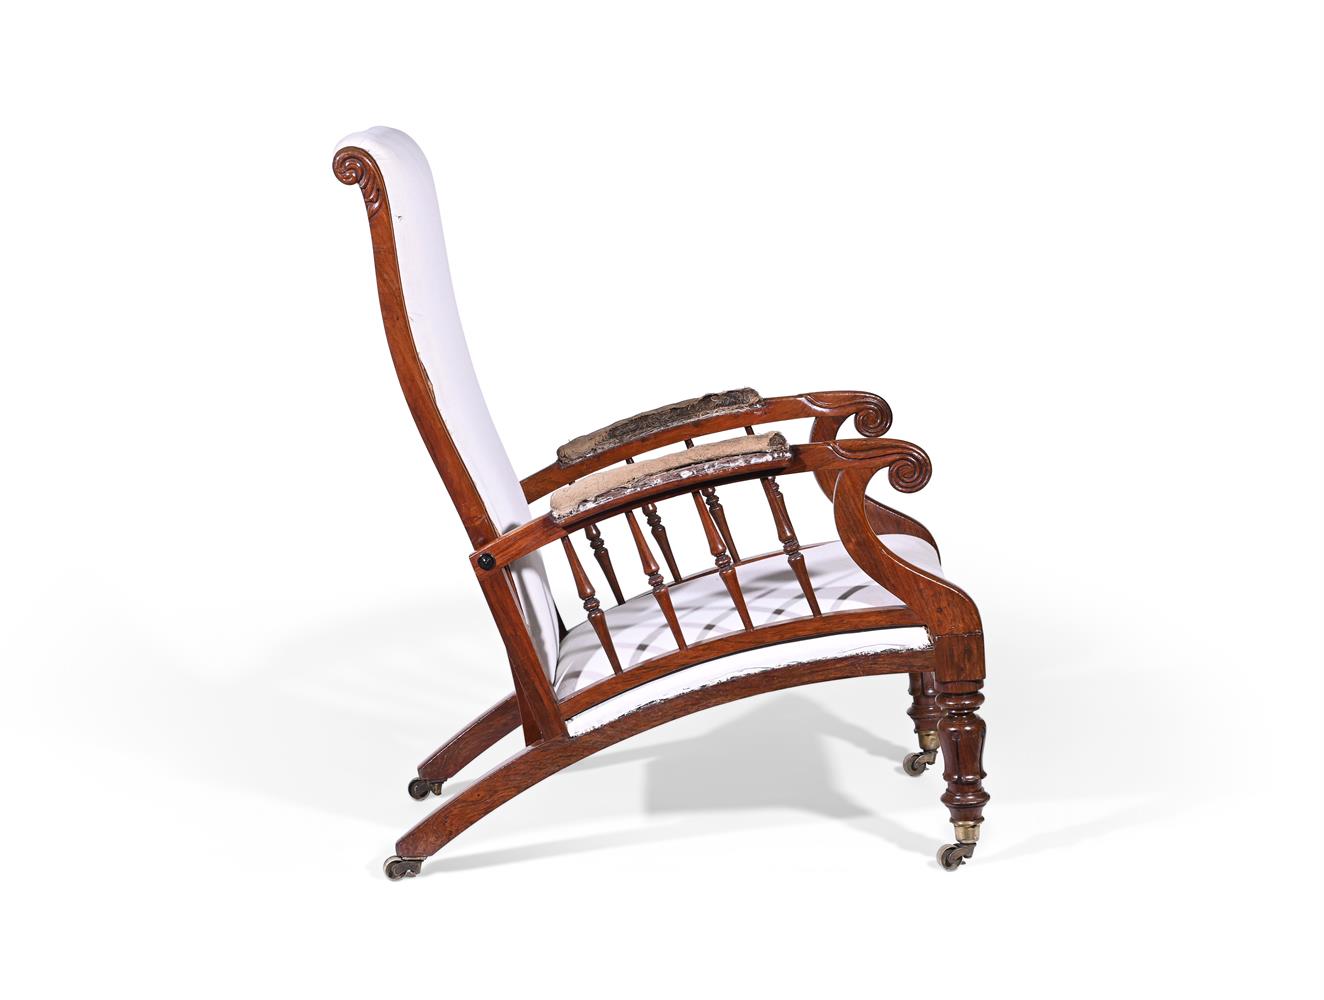 Y AN ARTS AND CRAFTS ROSEWOOD ARMCHAIR, IN THE MANNER OF PHILIP WEBB, CIRCA 1890 - Image 3 of 3